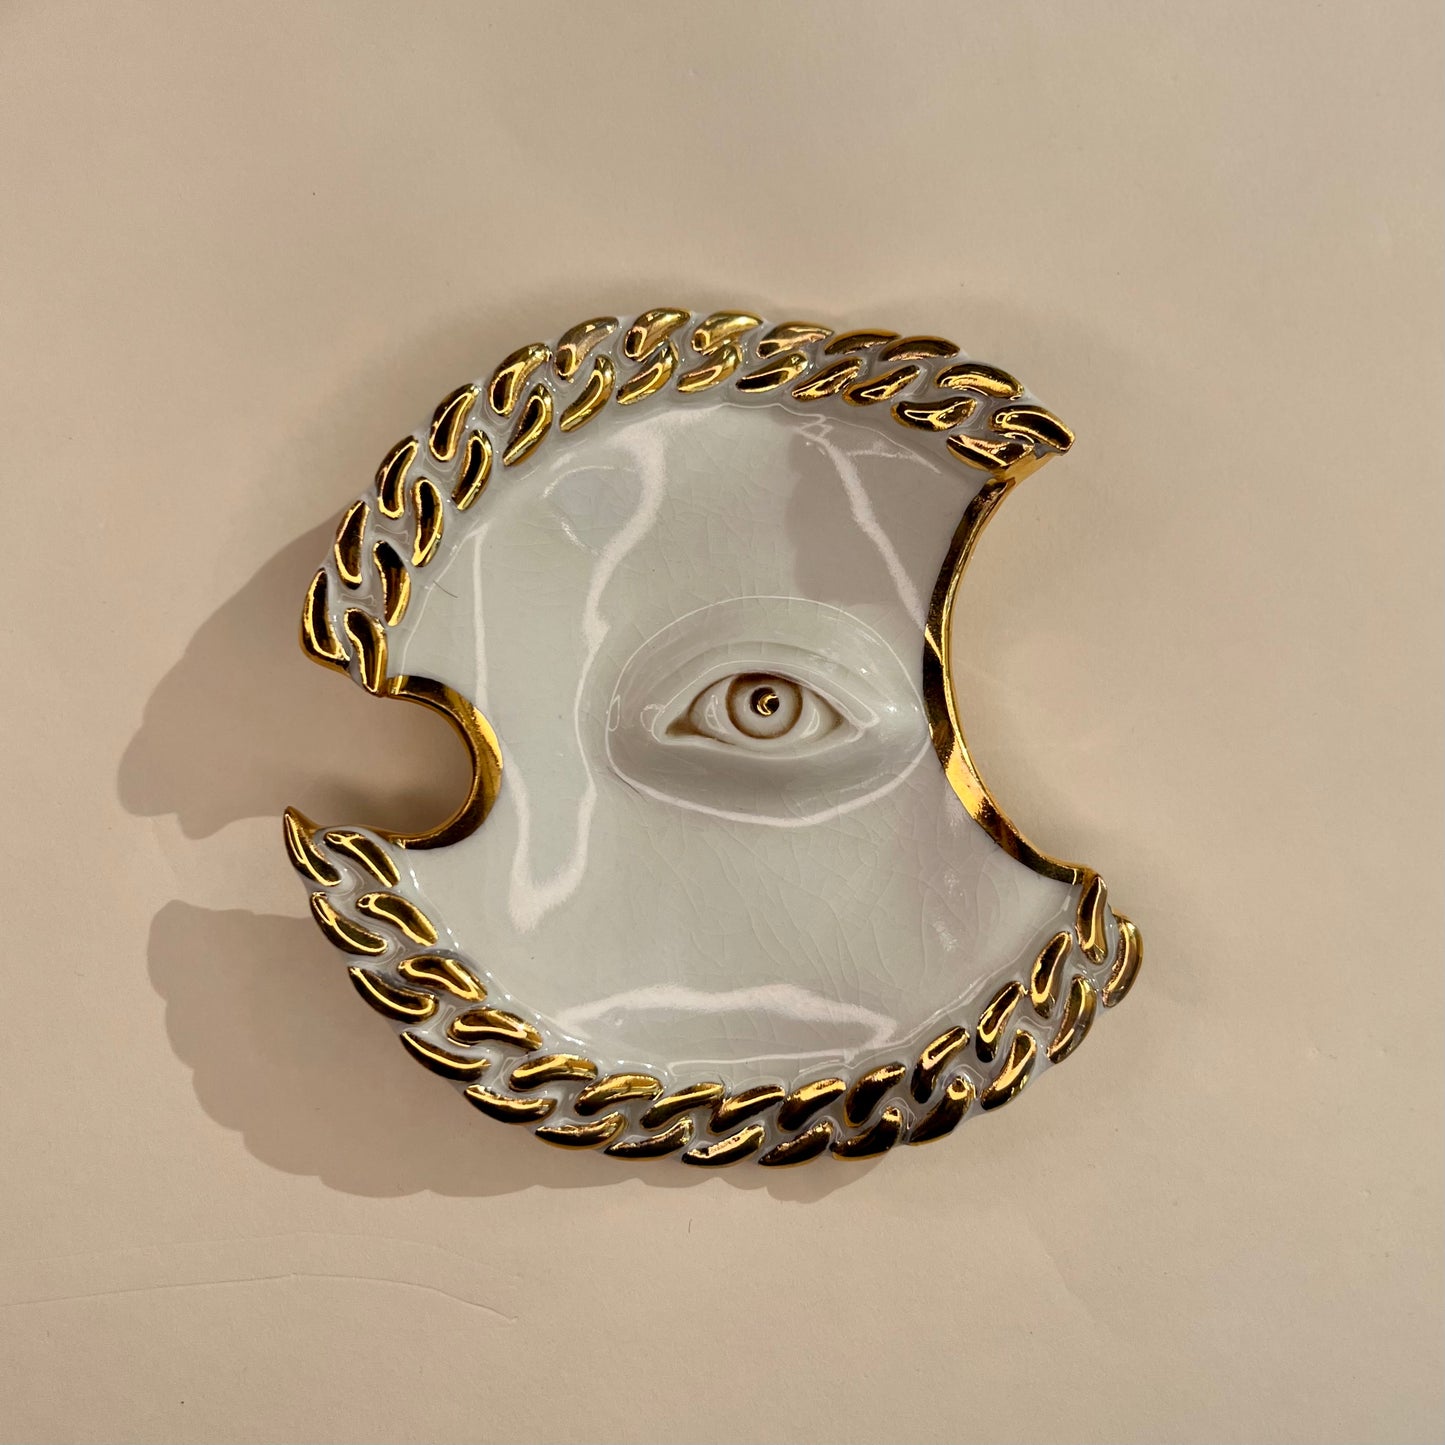 Jewellery Dish 1 -  Hand crafted Porcelain Home Ornament. Circular ornament with Chain Border & Unique Eye Design